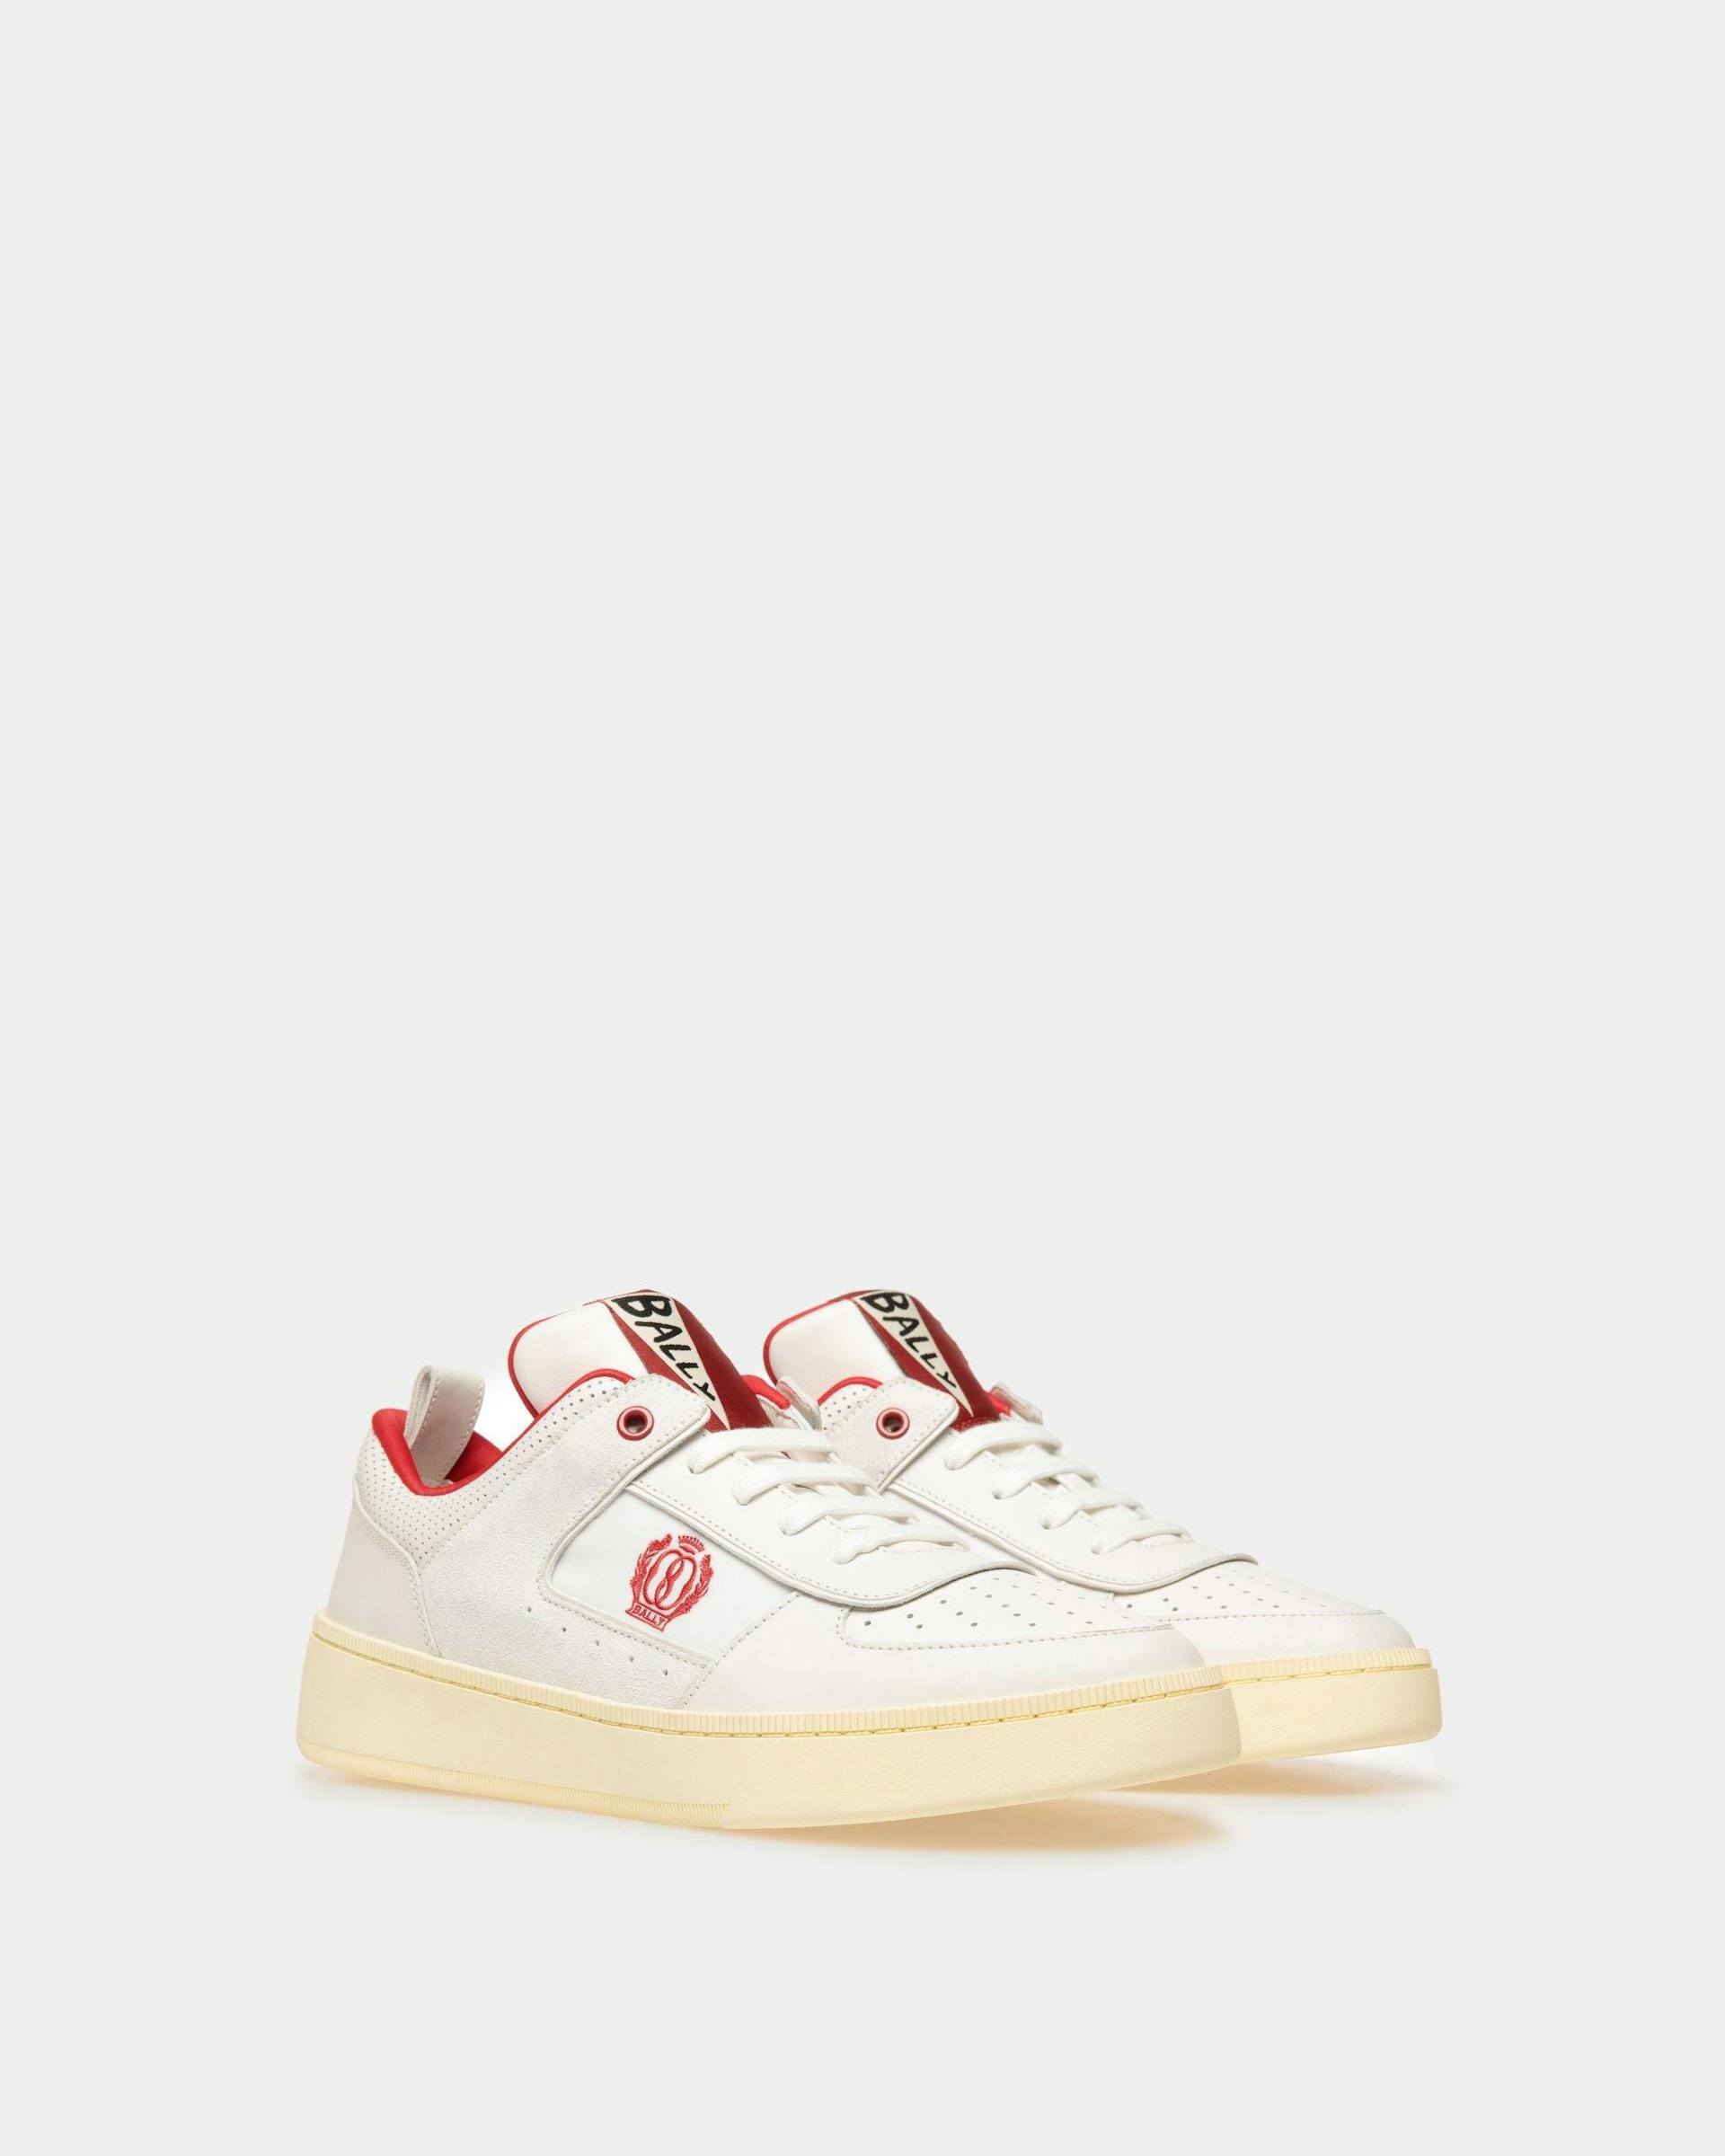 Raise Sneakers In White Leather - Men's - Bally - 02